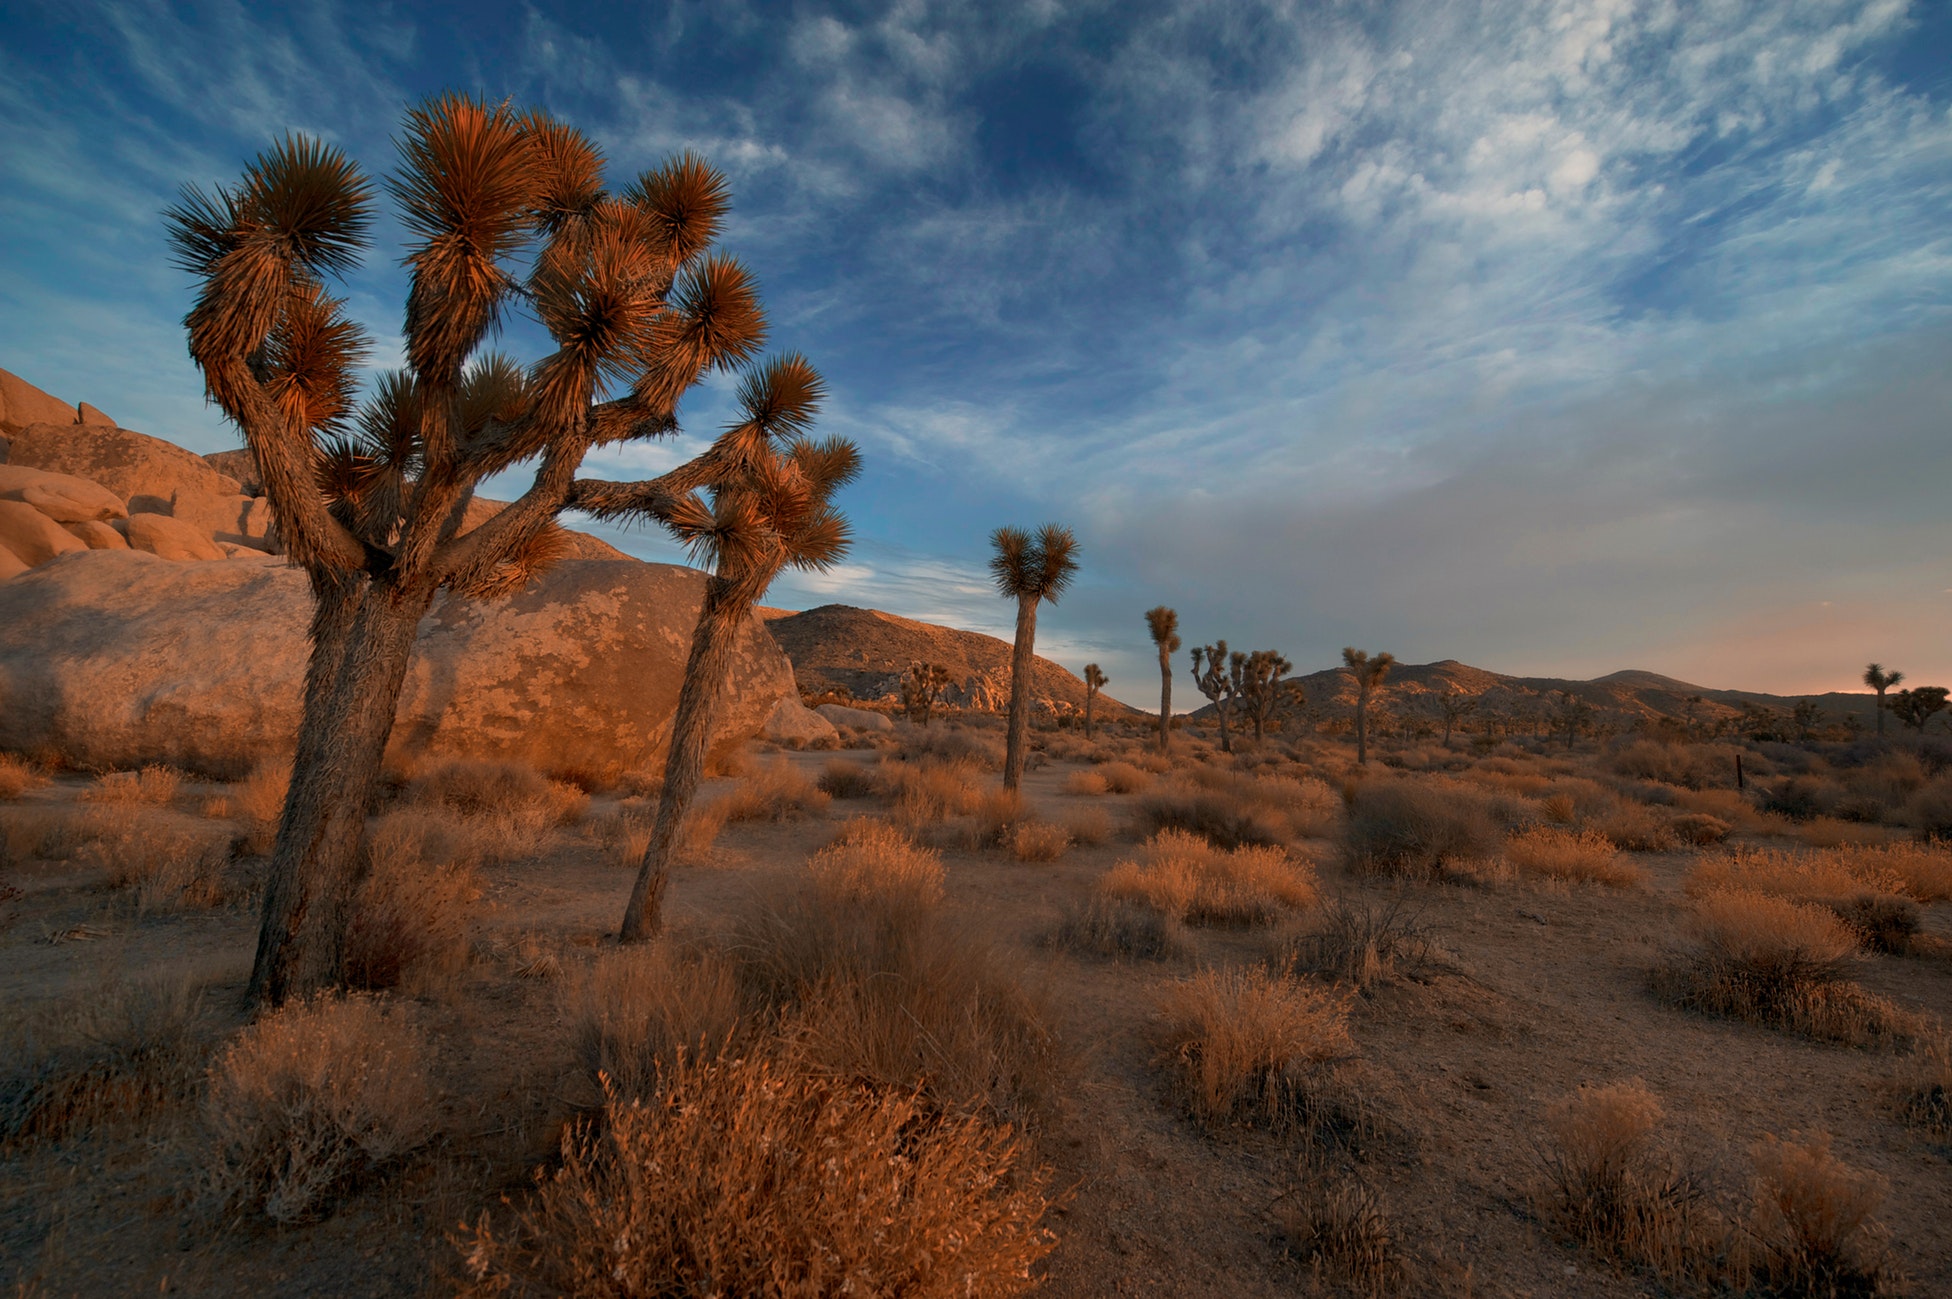 What to do in Joshua Tree? Enjoy the outdoors!